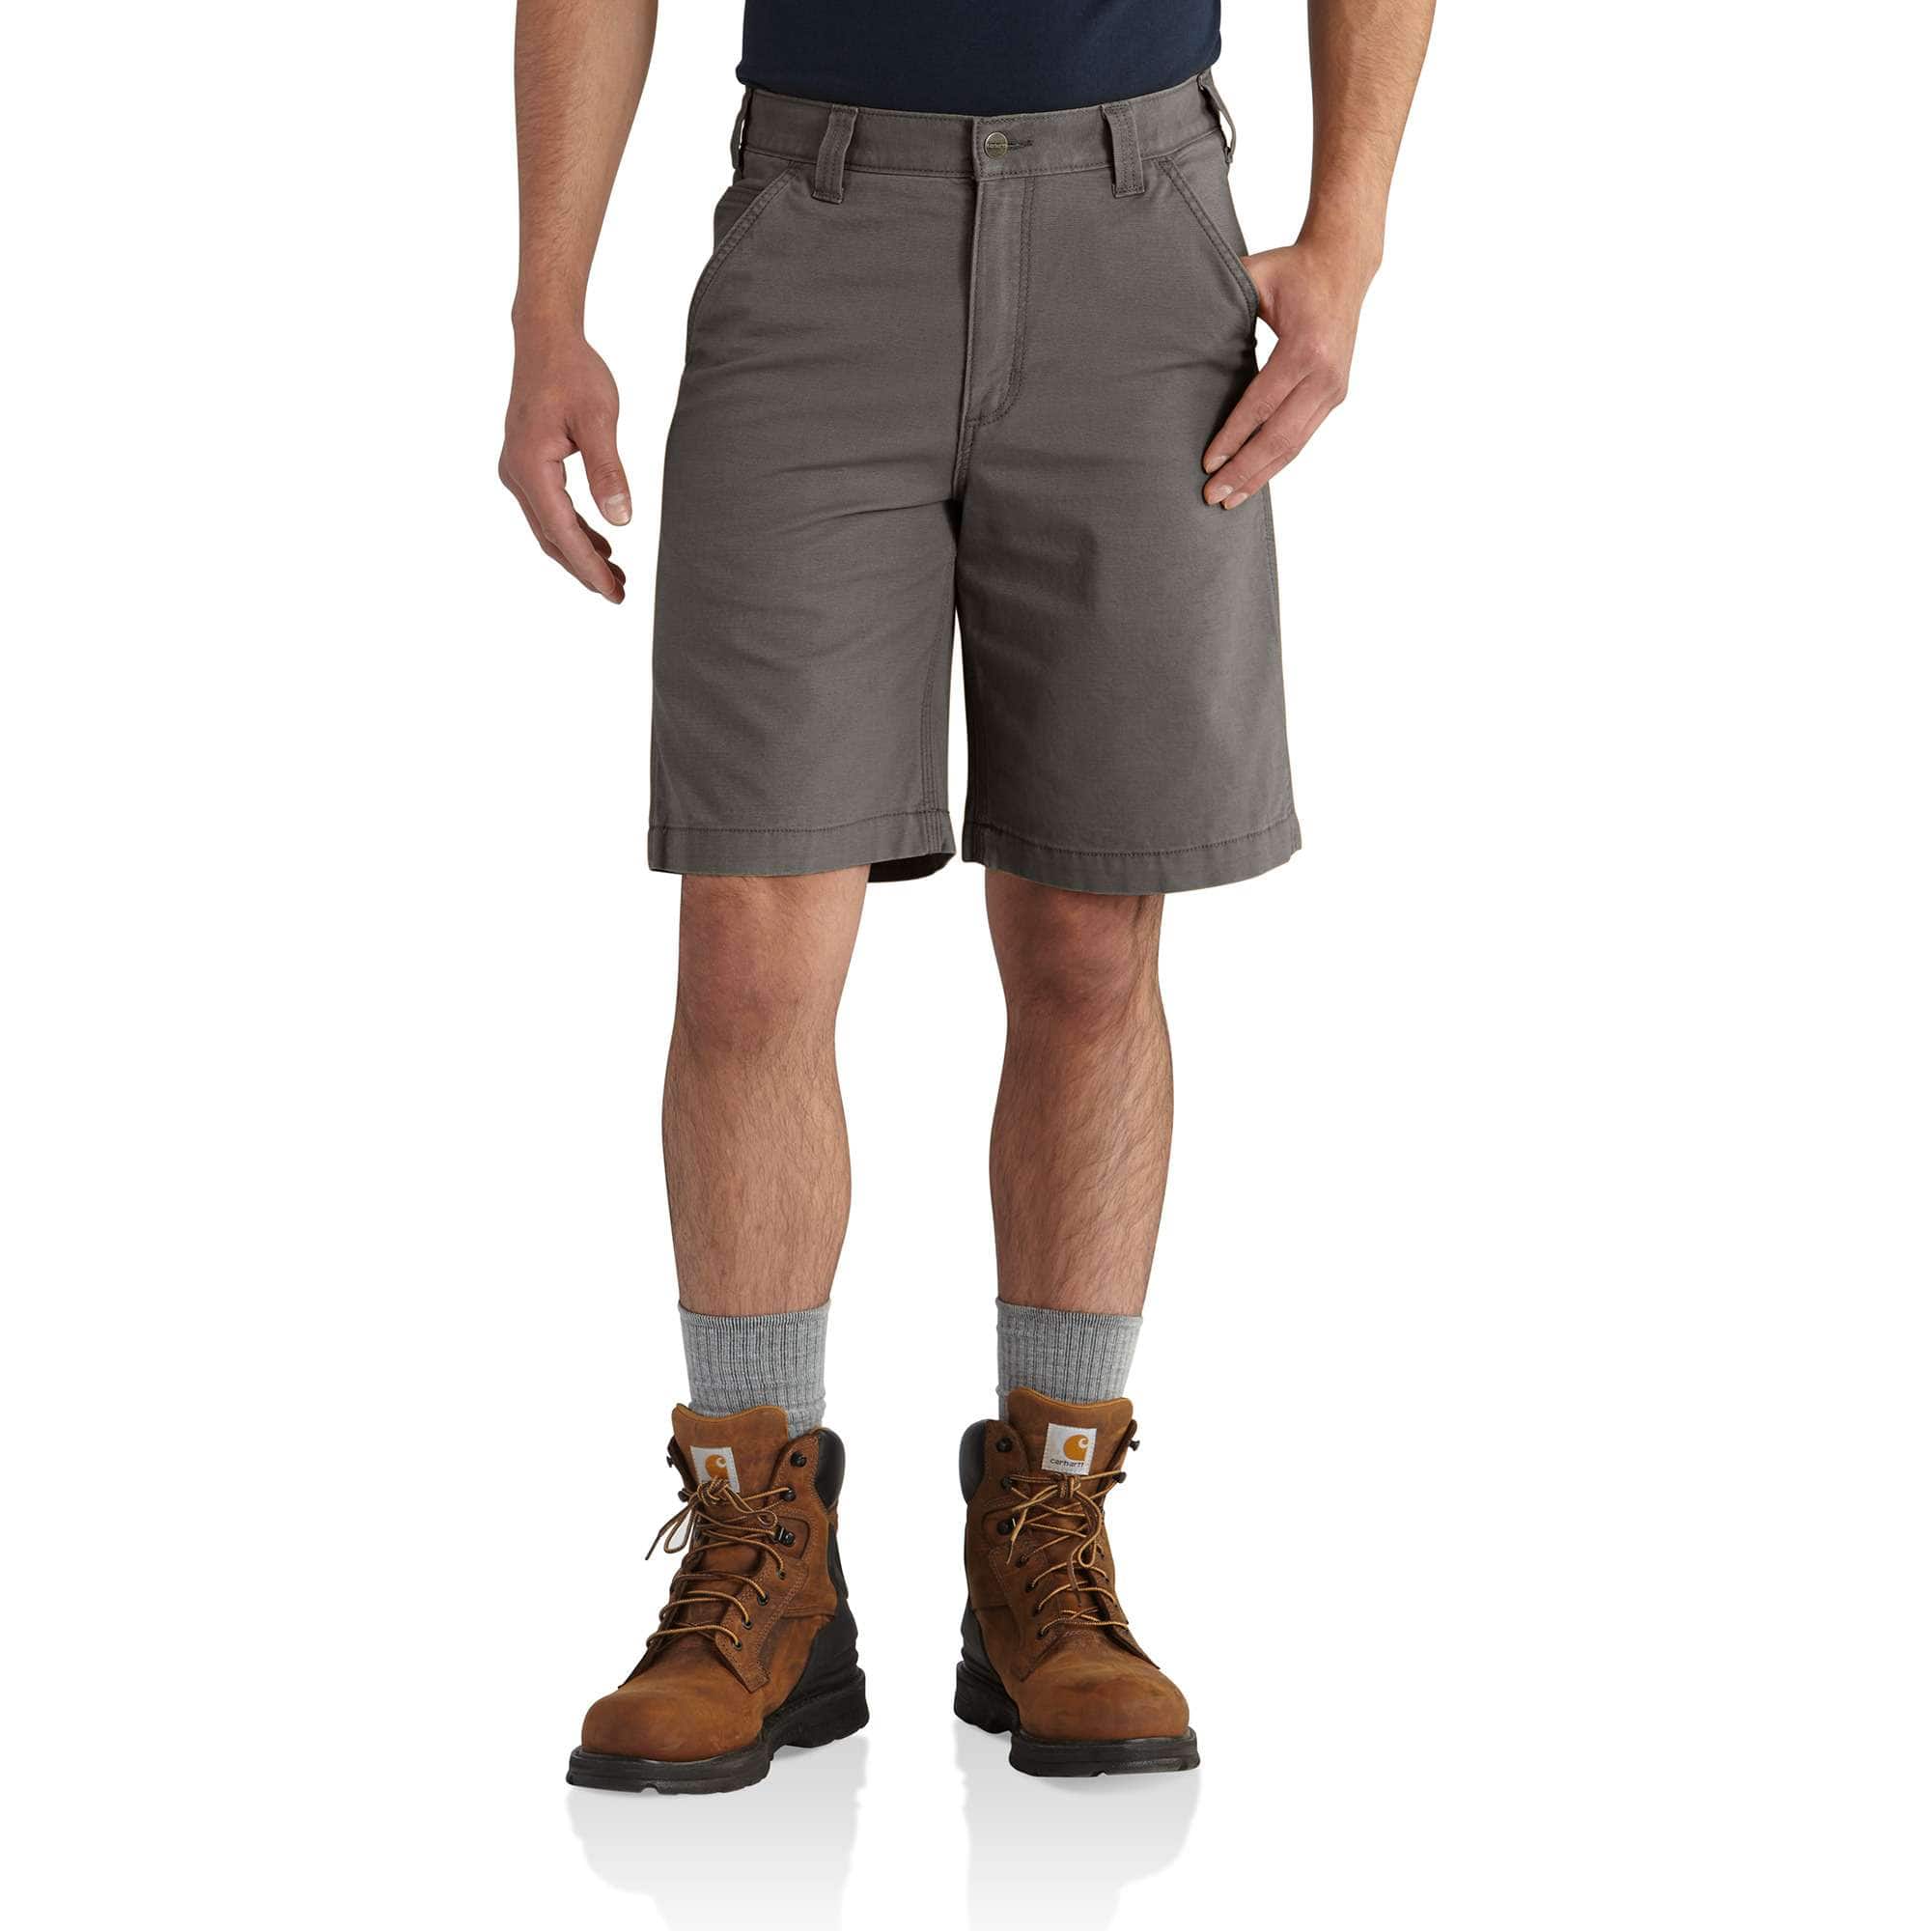 Rugged Flex® Relaxed Fit Canvas Work Short, Men's Best Sellers